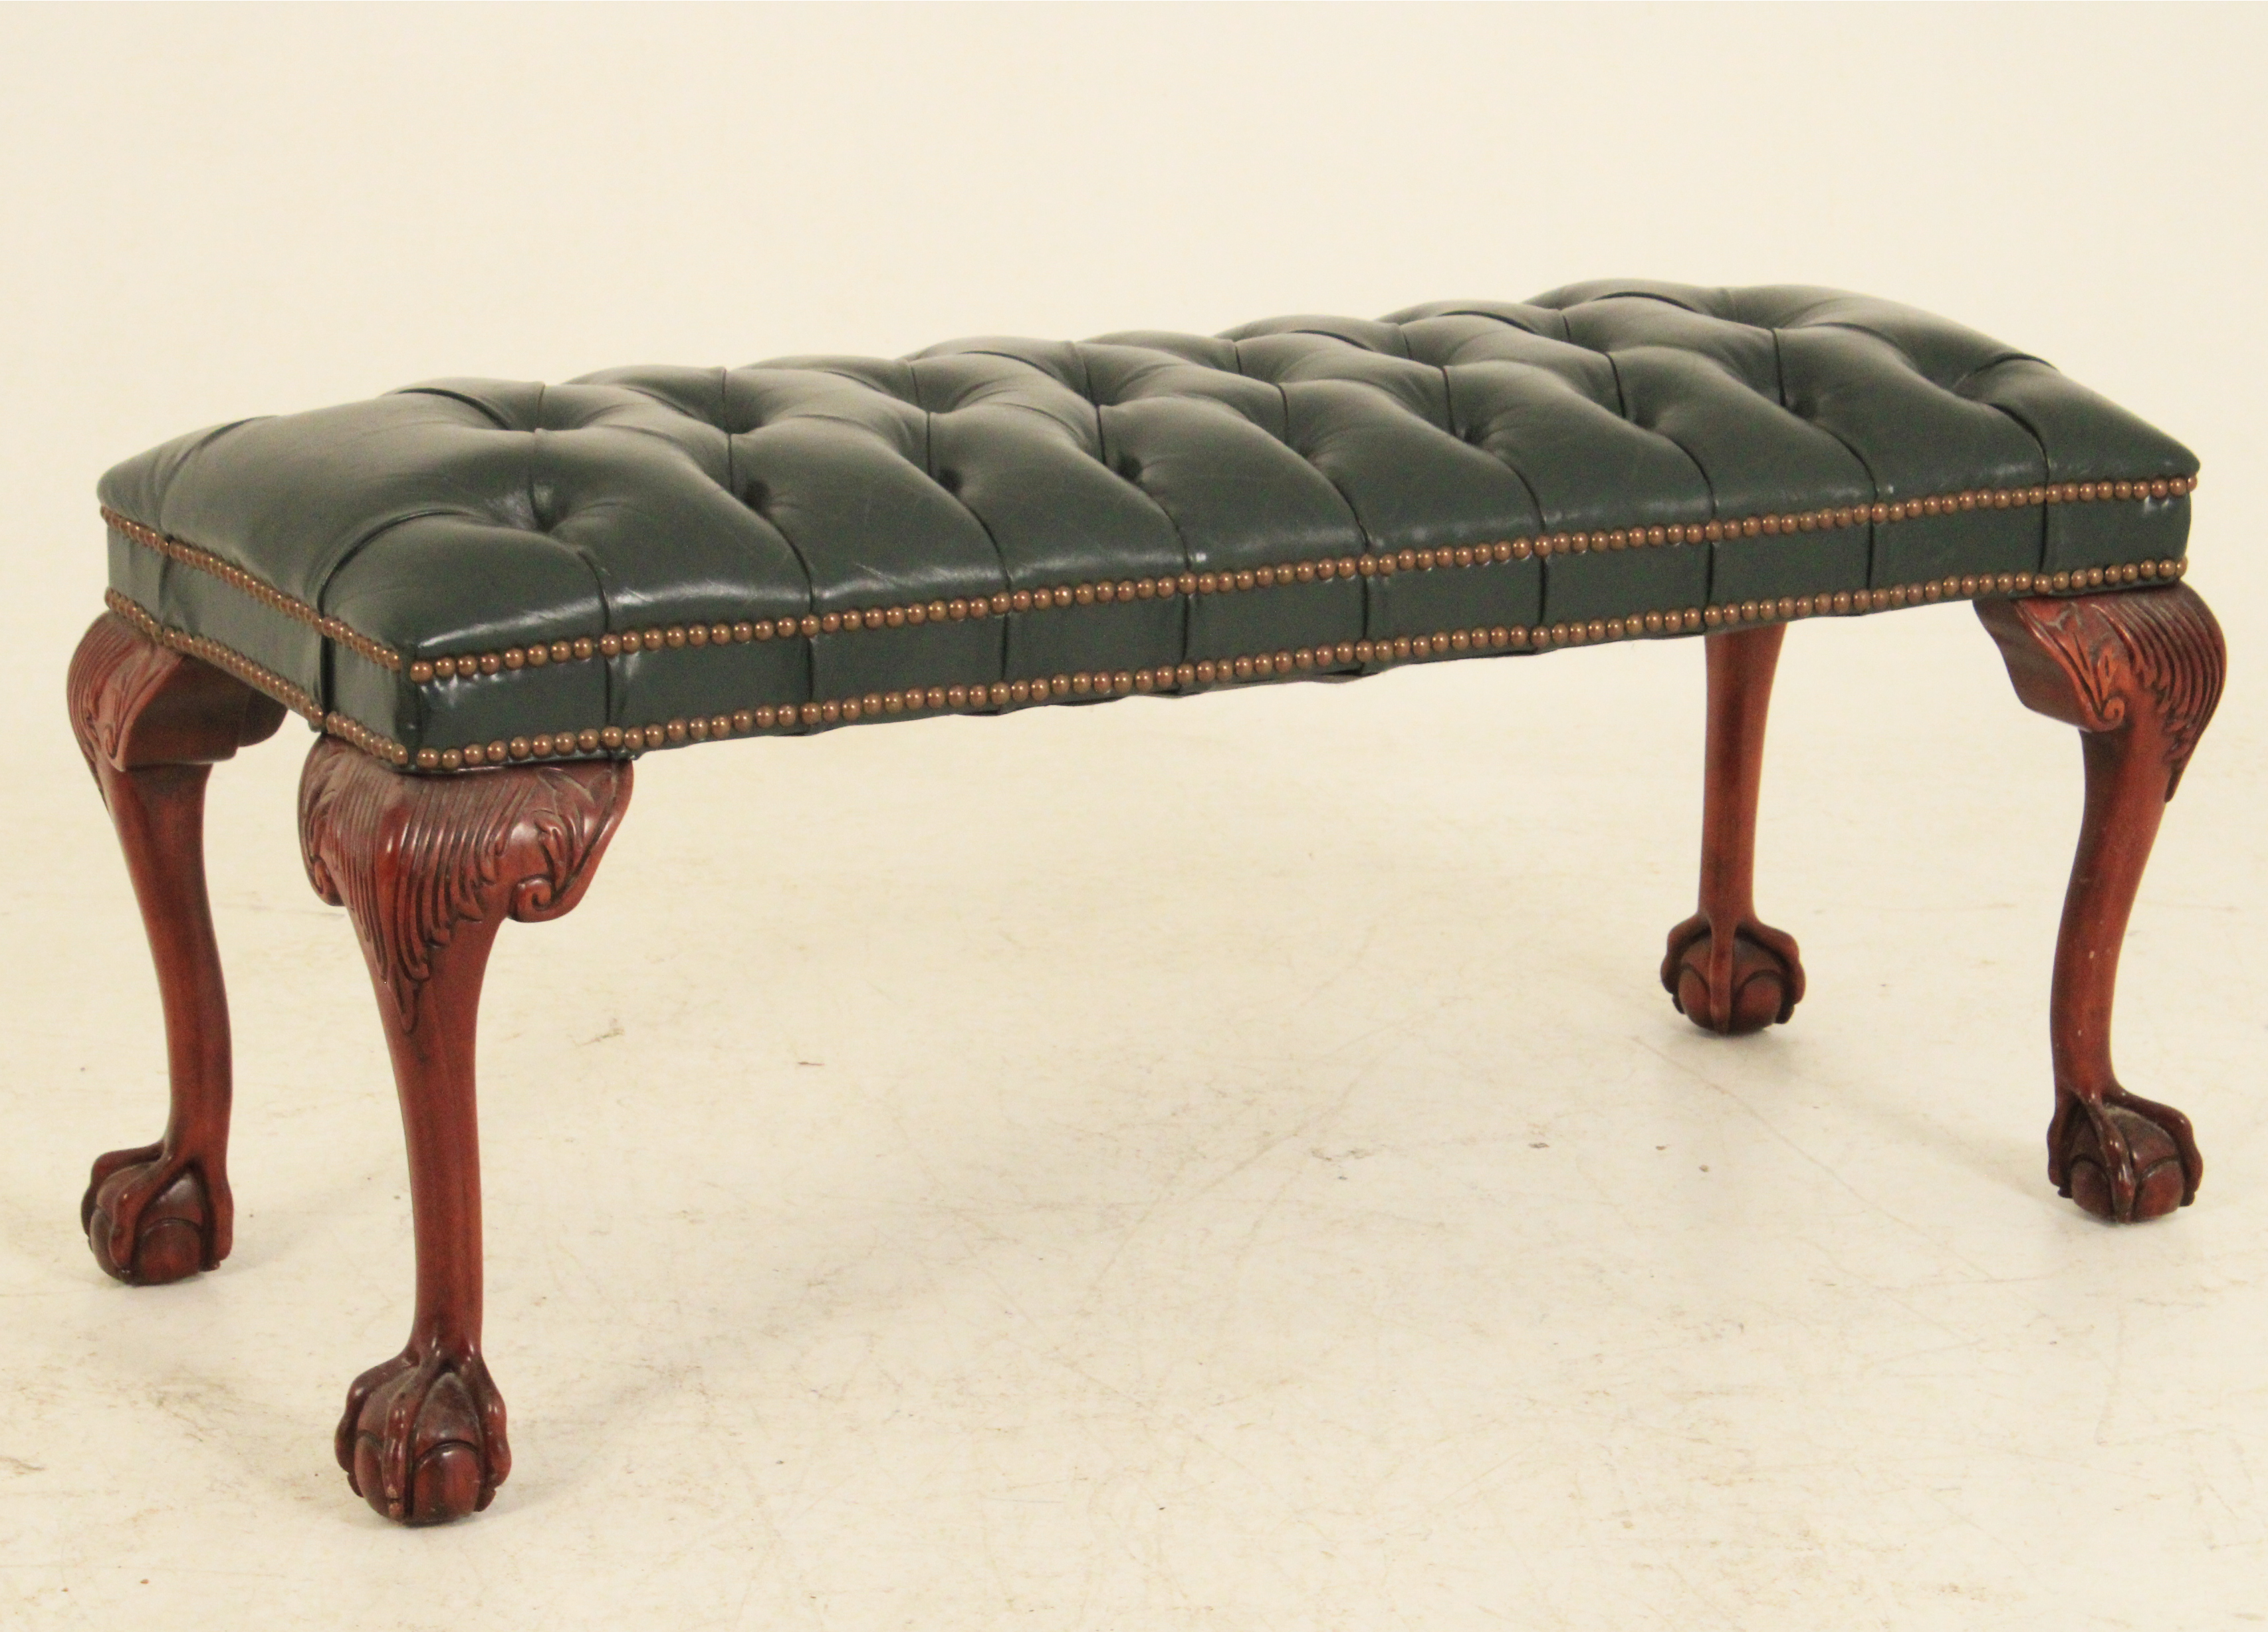 CHIPPENDALE STYLE TUFTED LEATHER 35eca3